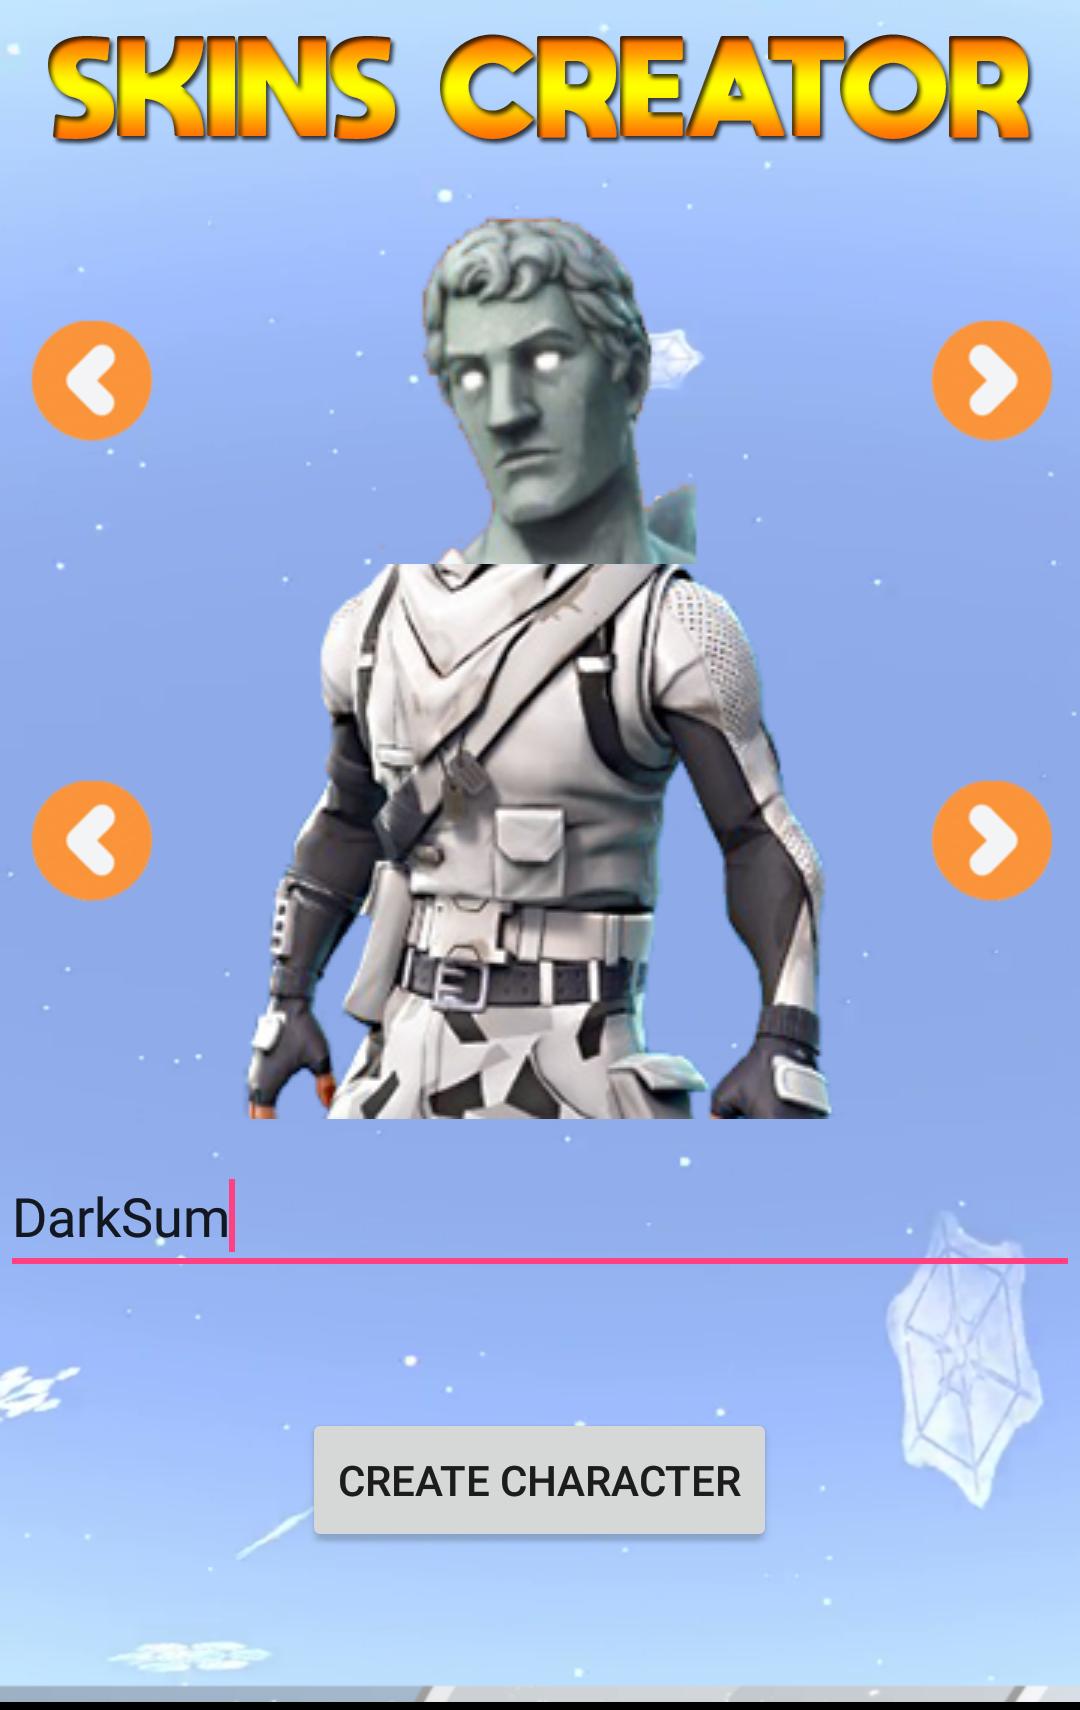 Skins Creator for Fortnite for Android - APK Download